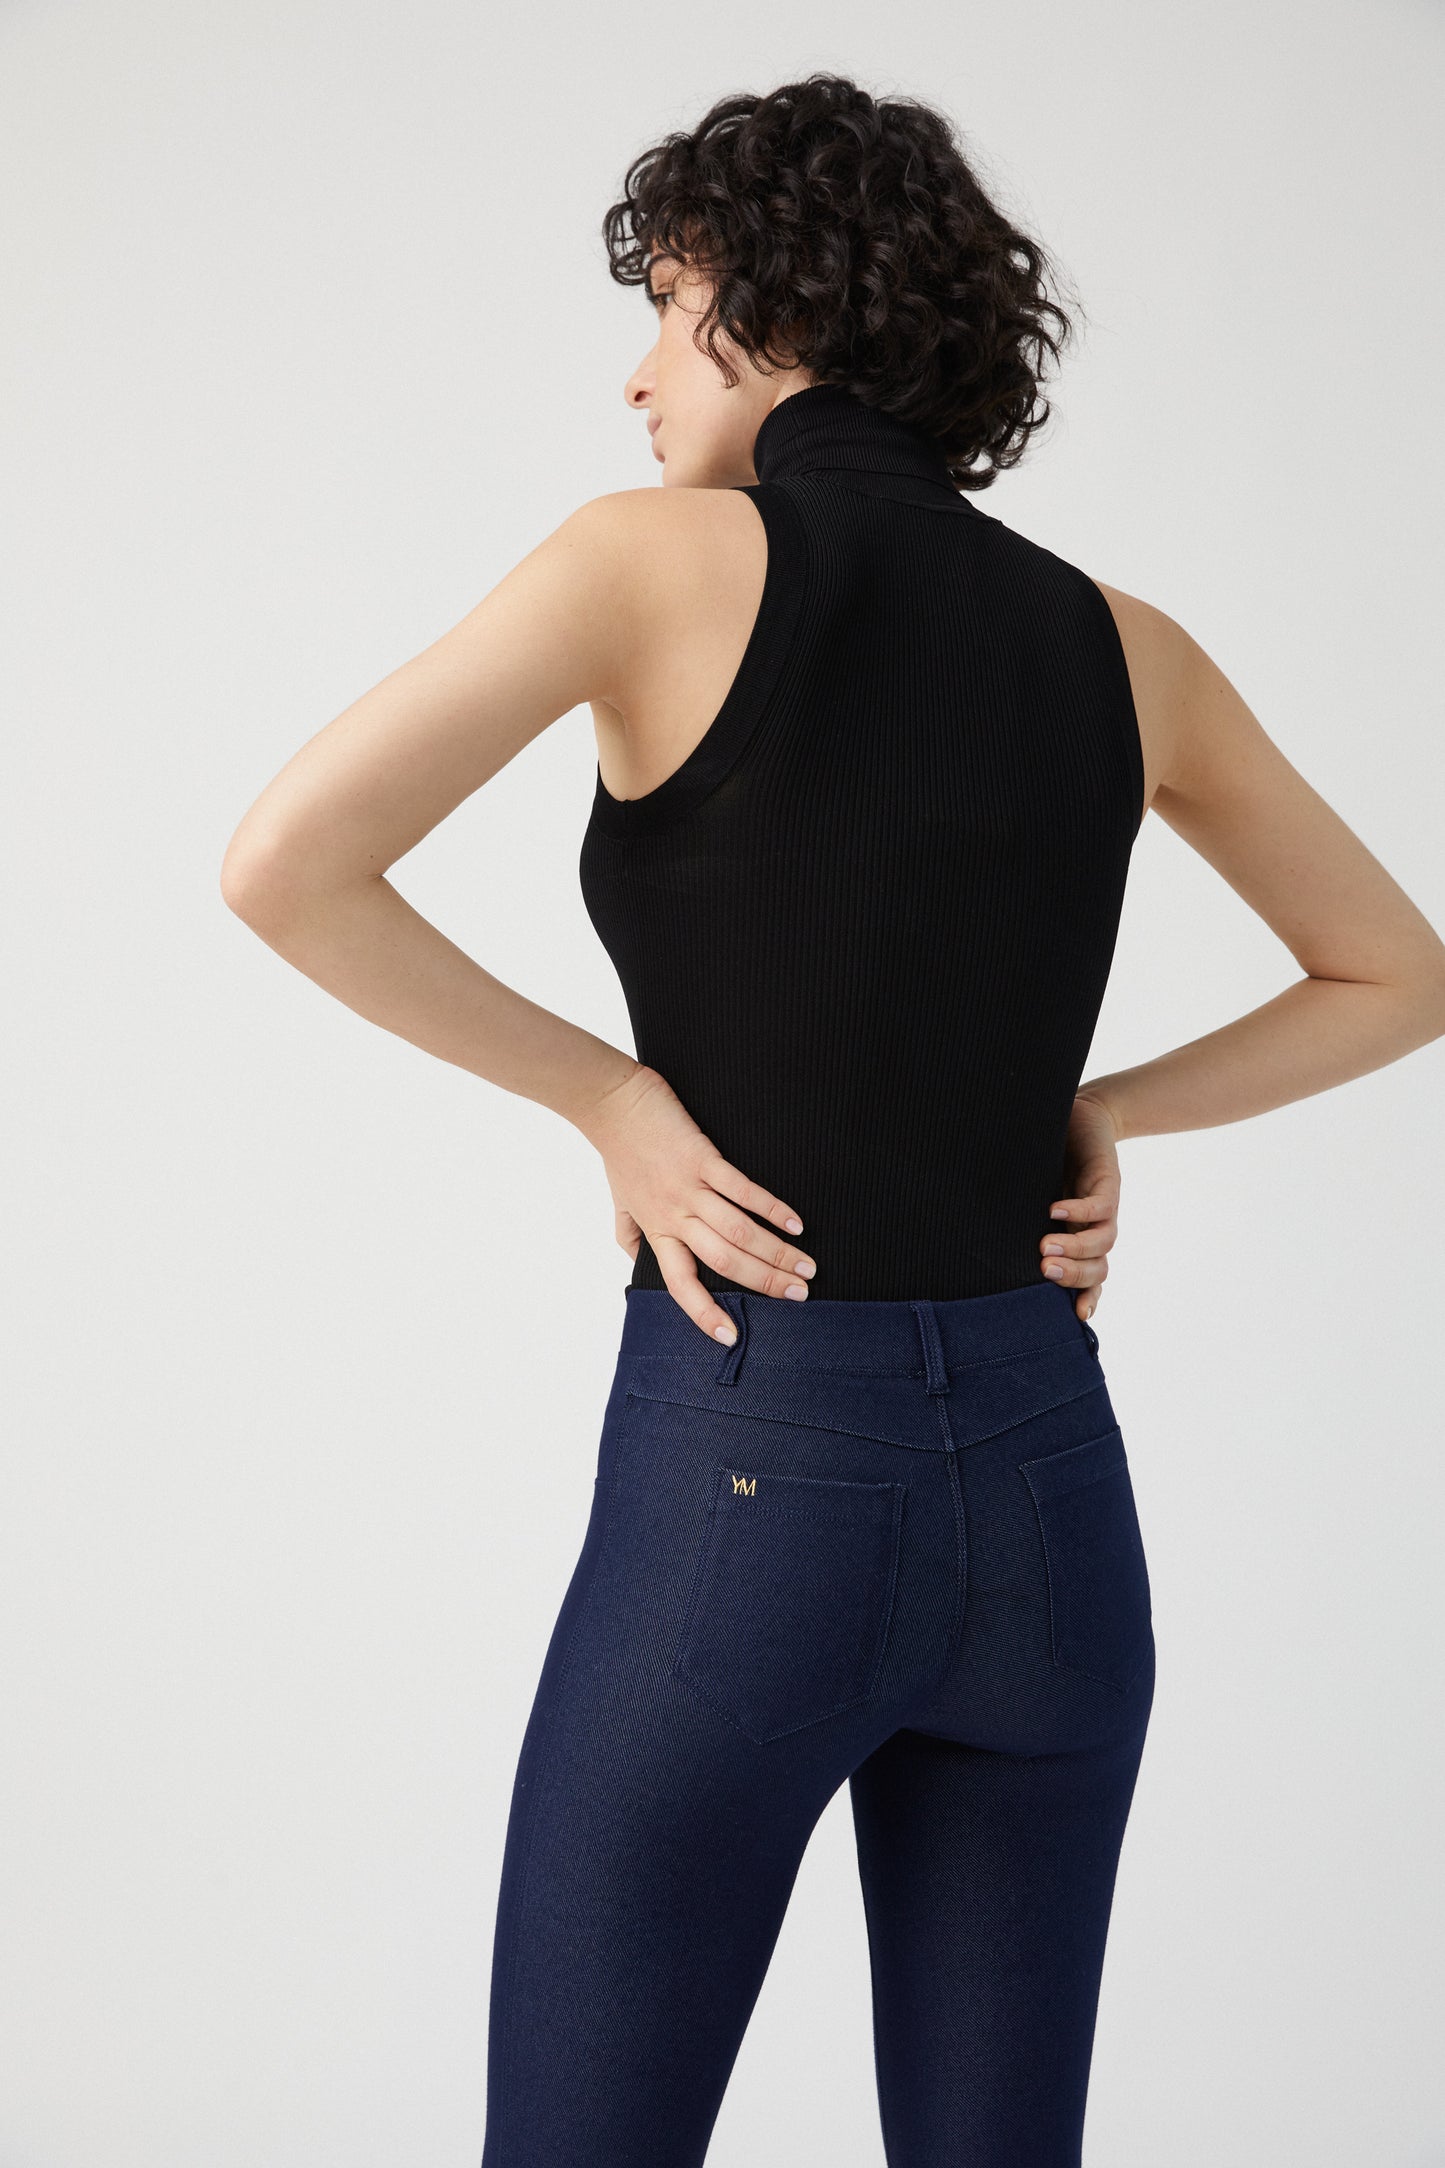 Ysabel Mora 70262 Leggings - Dark denim blue soft, stretchy and super comfy mid rise jean leggings (jeggings) with rear pockets, belt loops, and faux front pockets and fly stitching.